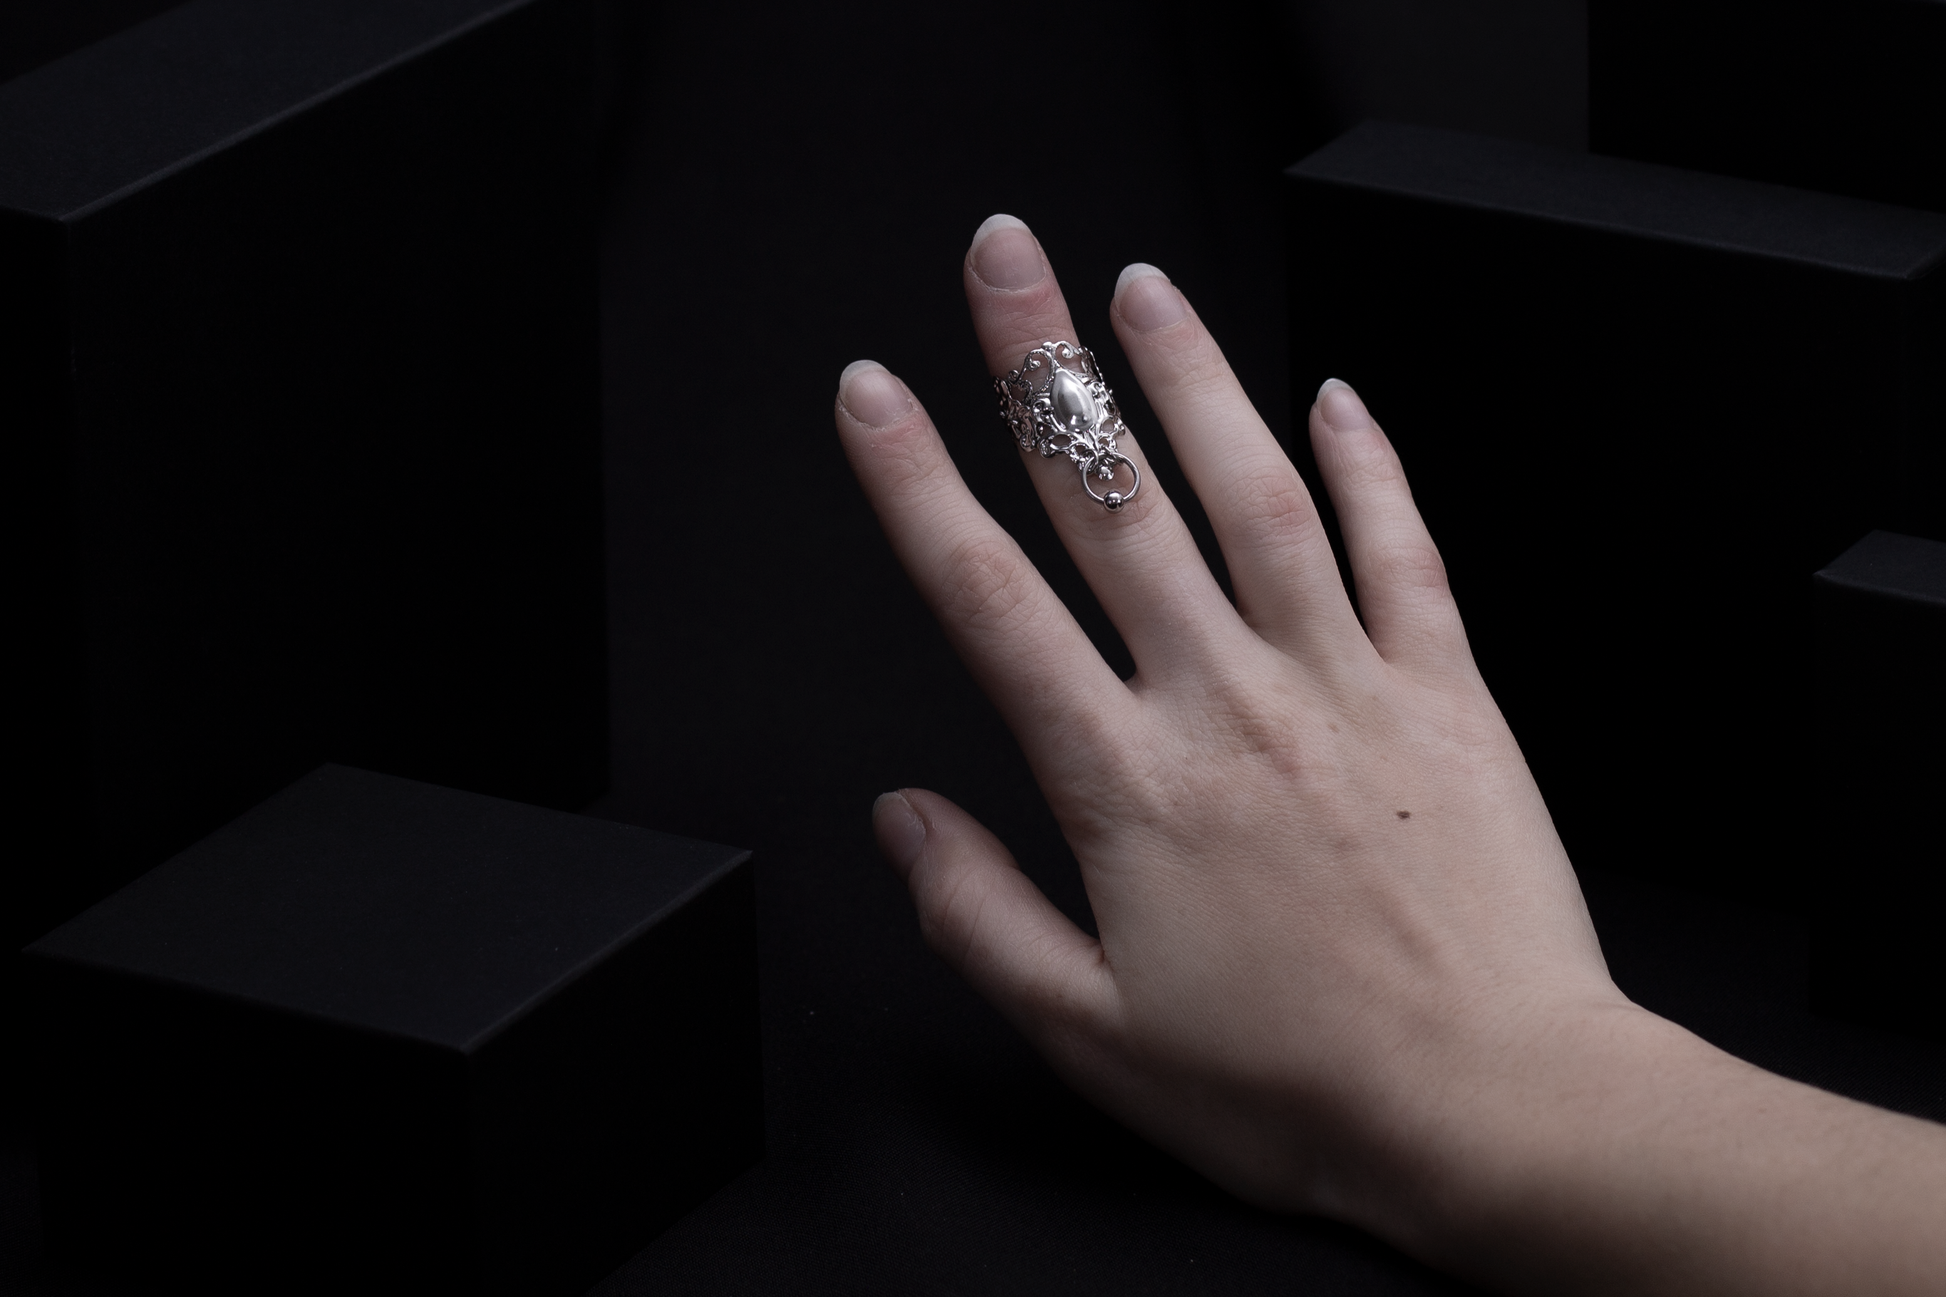 A hand models a Myril Jewels midi ring with neo-gothic allure, featuring ornate silver filigree and a central teardrop motif. This piece encapsulates gothic-chic and witchcore trends, making it an ideal accessory for bold everyday wear, rave events, or as an inspired goth girlfriend or friend gift.